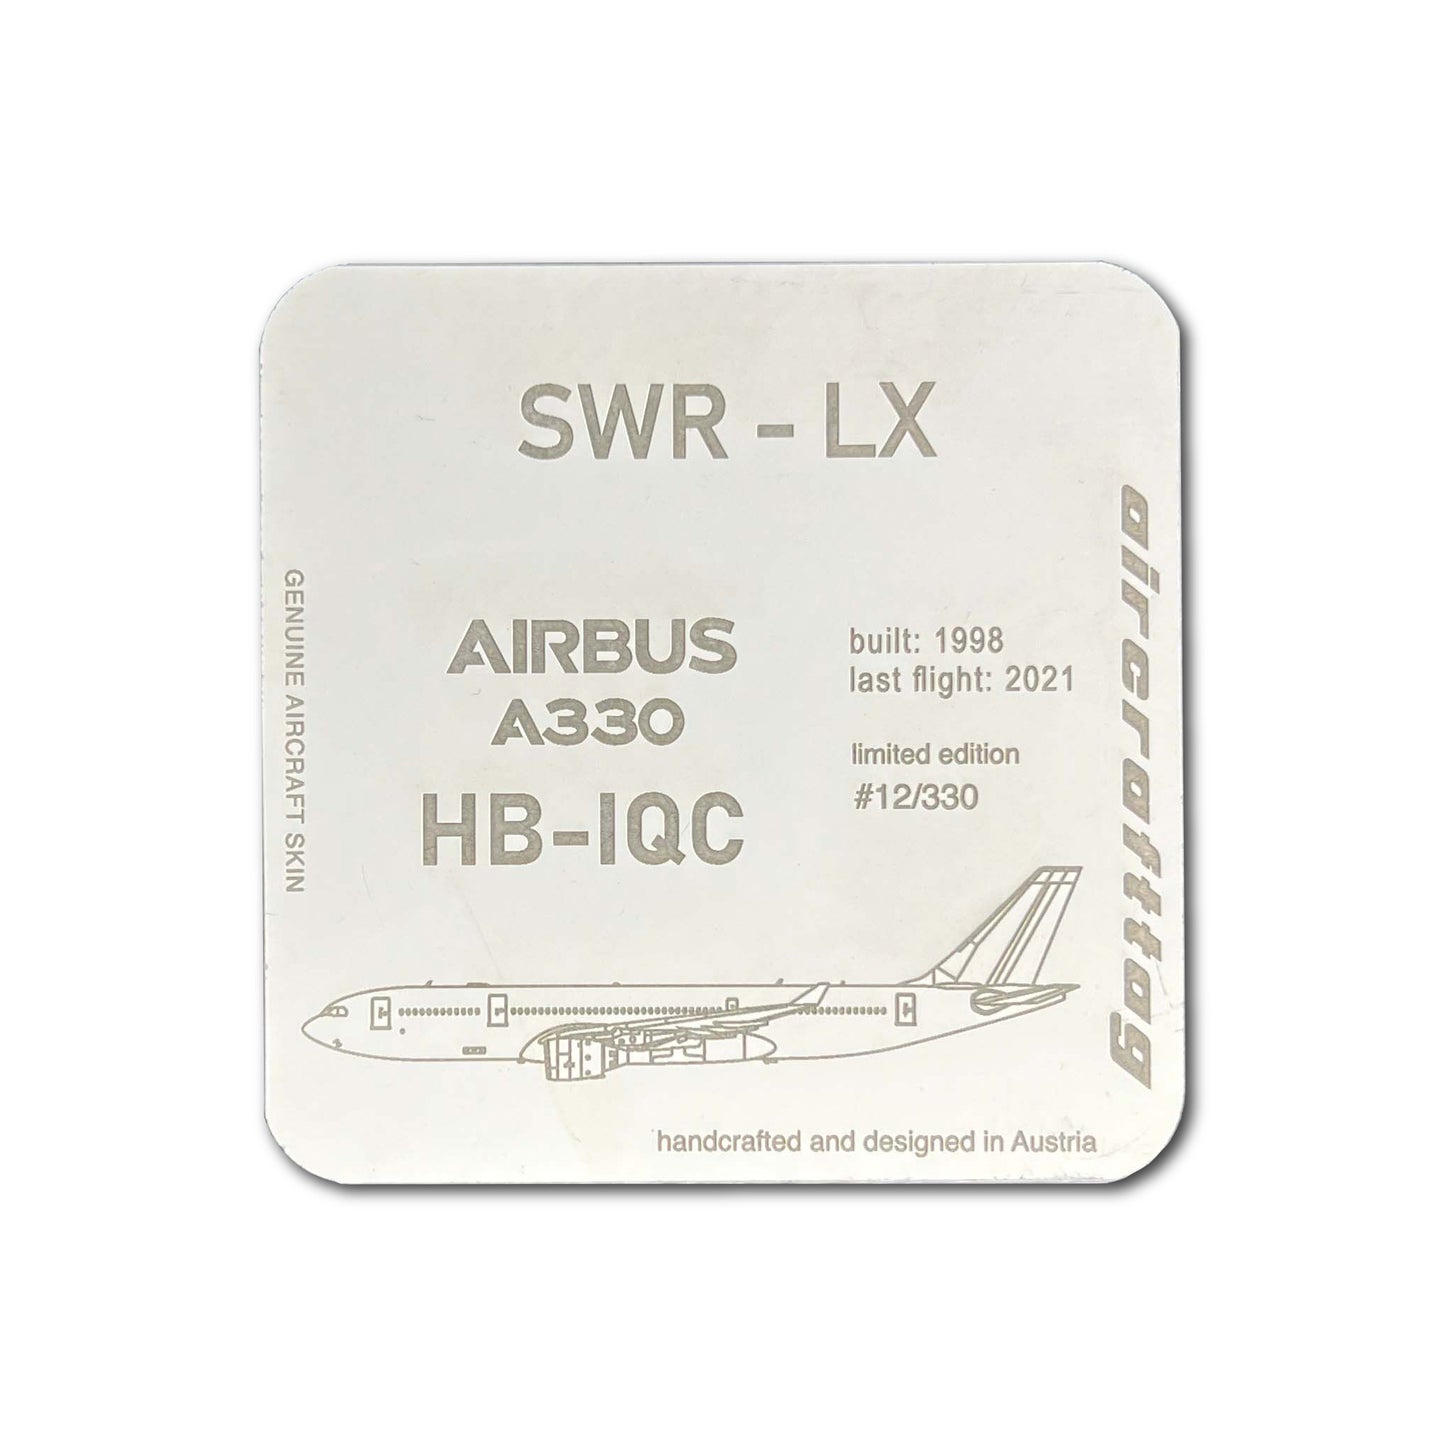 Coaster - Airbus A330 - HB-IQC  - SWISS "HISTORY COLLECTION"